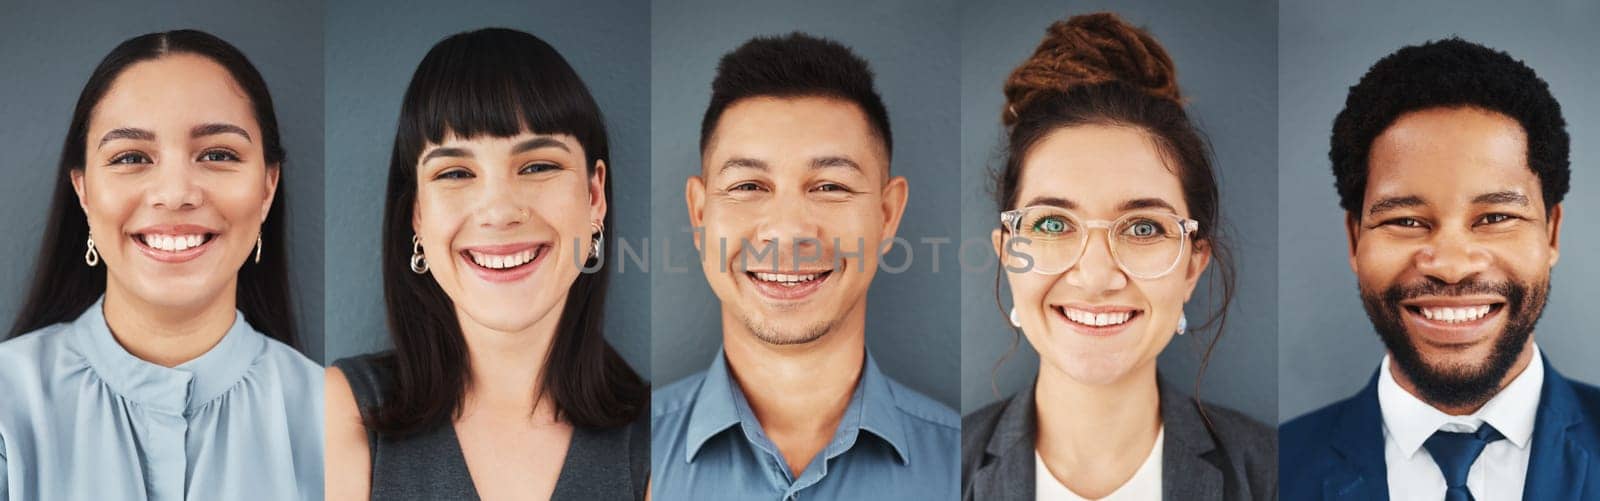 Collage, portrait and face of business people with smile, professional group and headshot on studio background. Diversity, employees and composite of happy corporate teamwork, global company or trust.